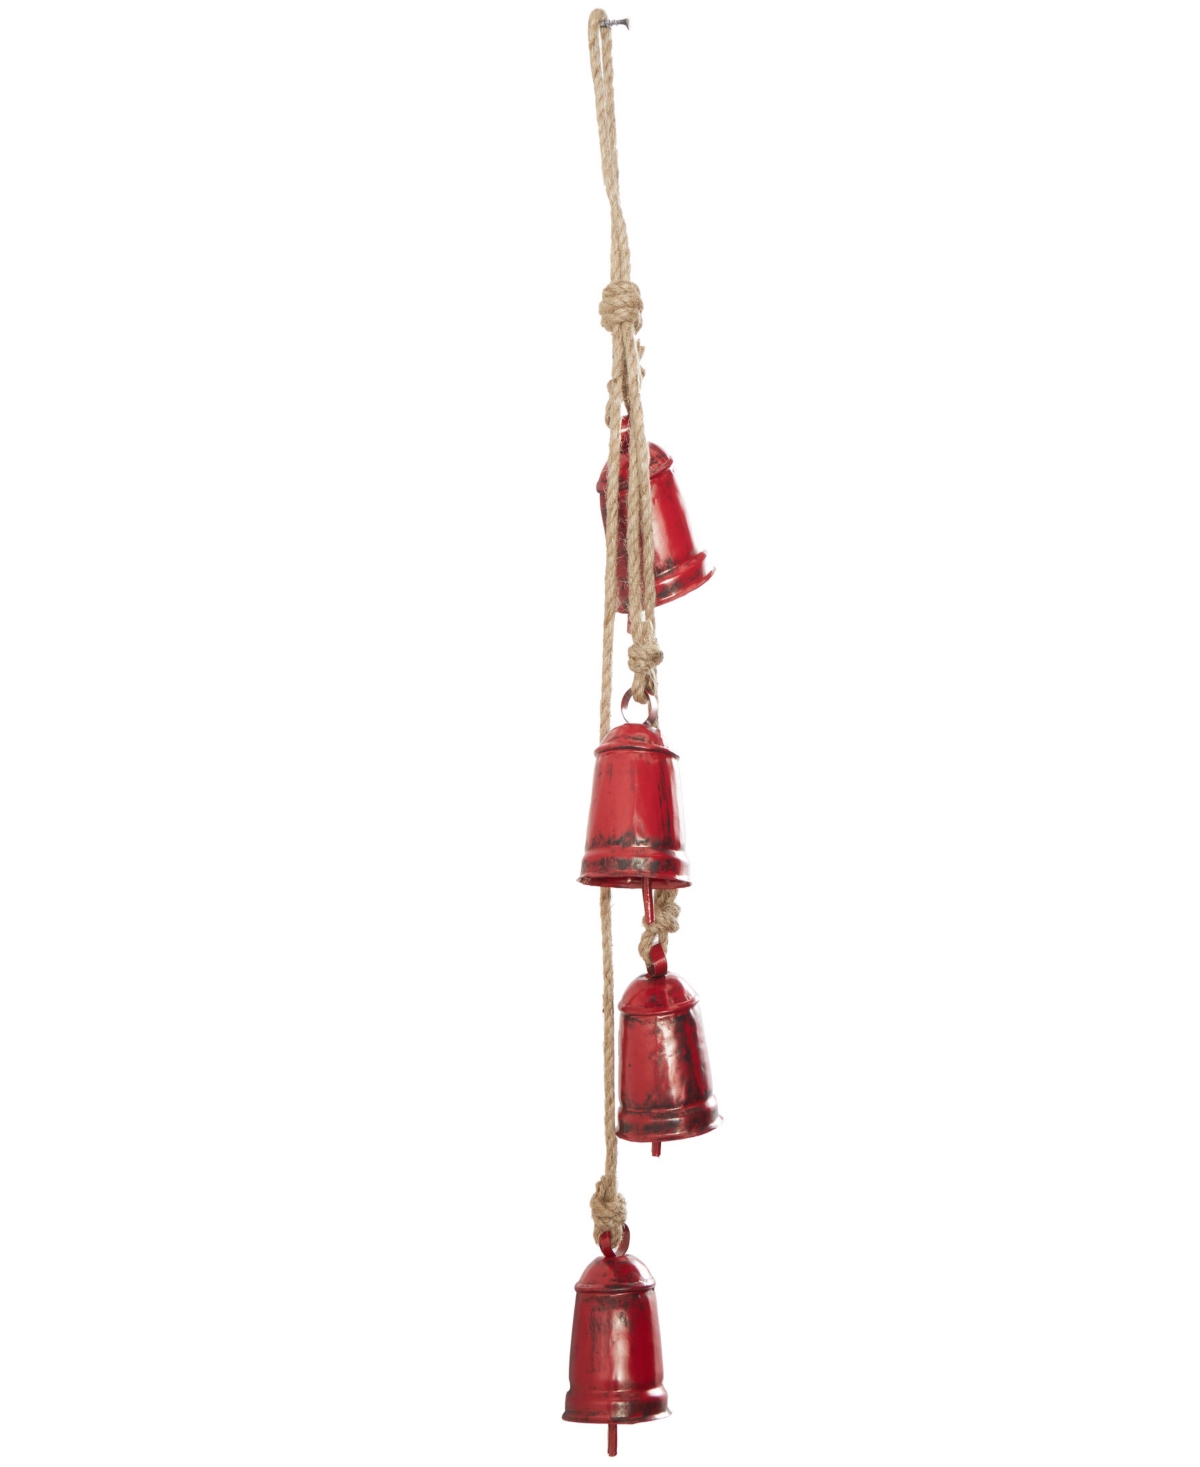 Rosemary Lane Metal Handmade Tibetan Inspired Decorative Cow Bell With Jute Hanging Rope, 4" X 3" X 29" In Red